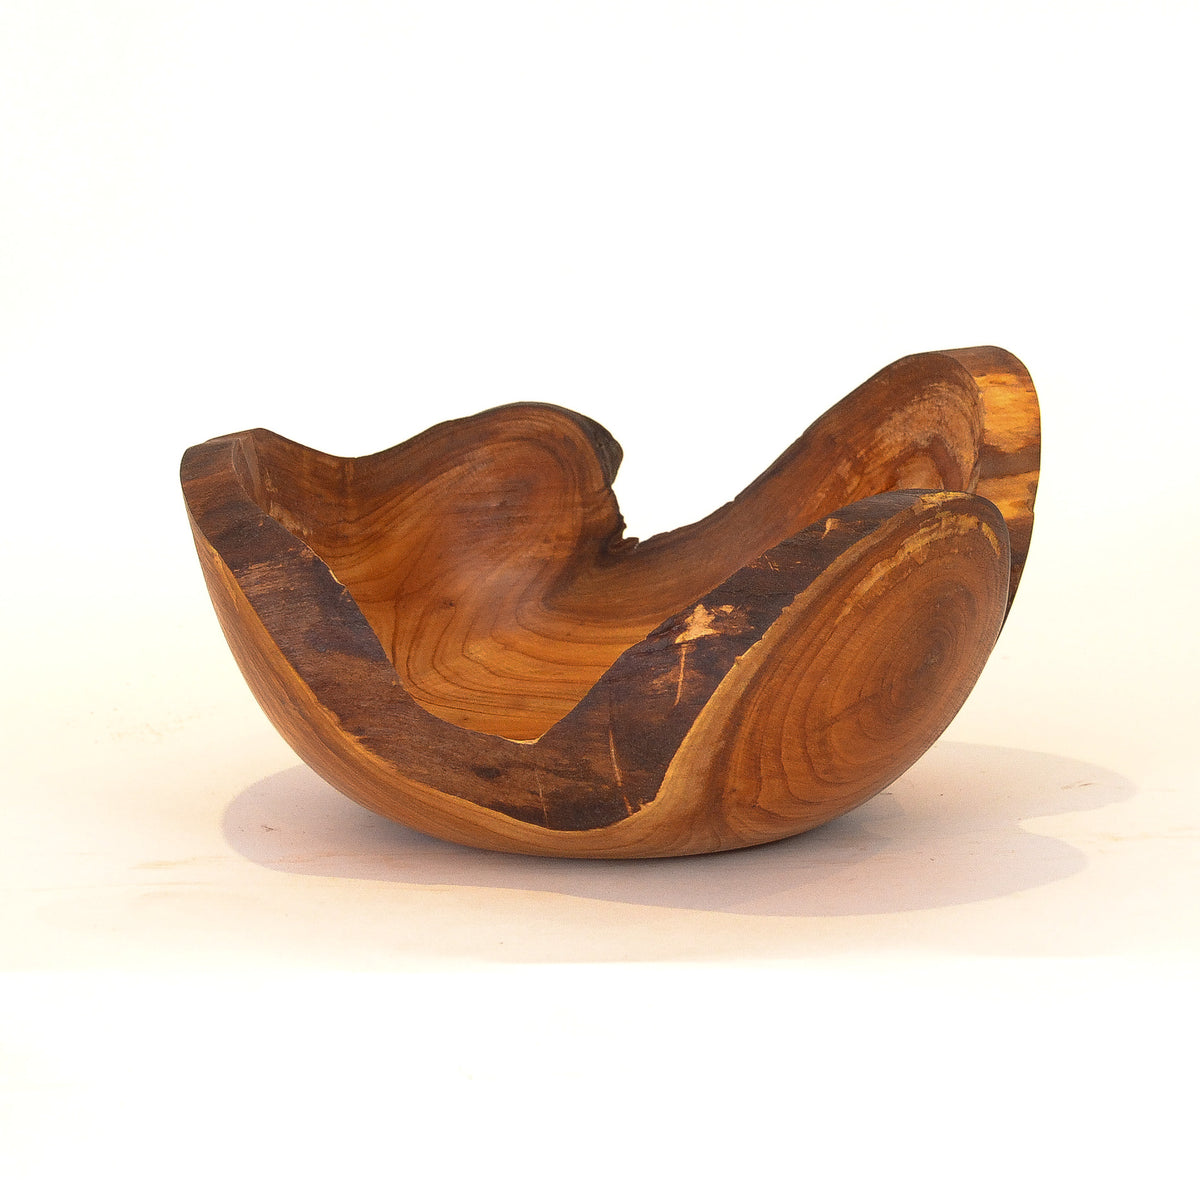 Natural Edge Wood Turned and Carved Bowl: Four Peaks